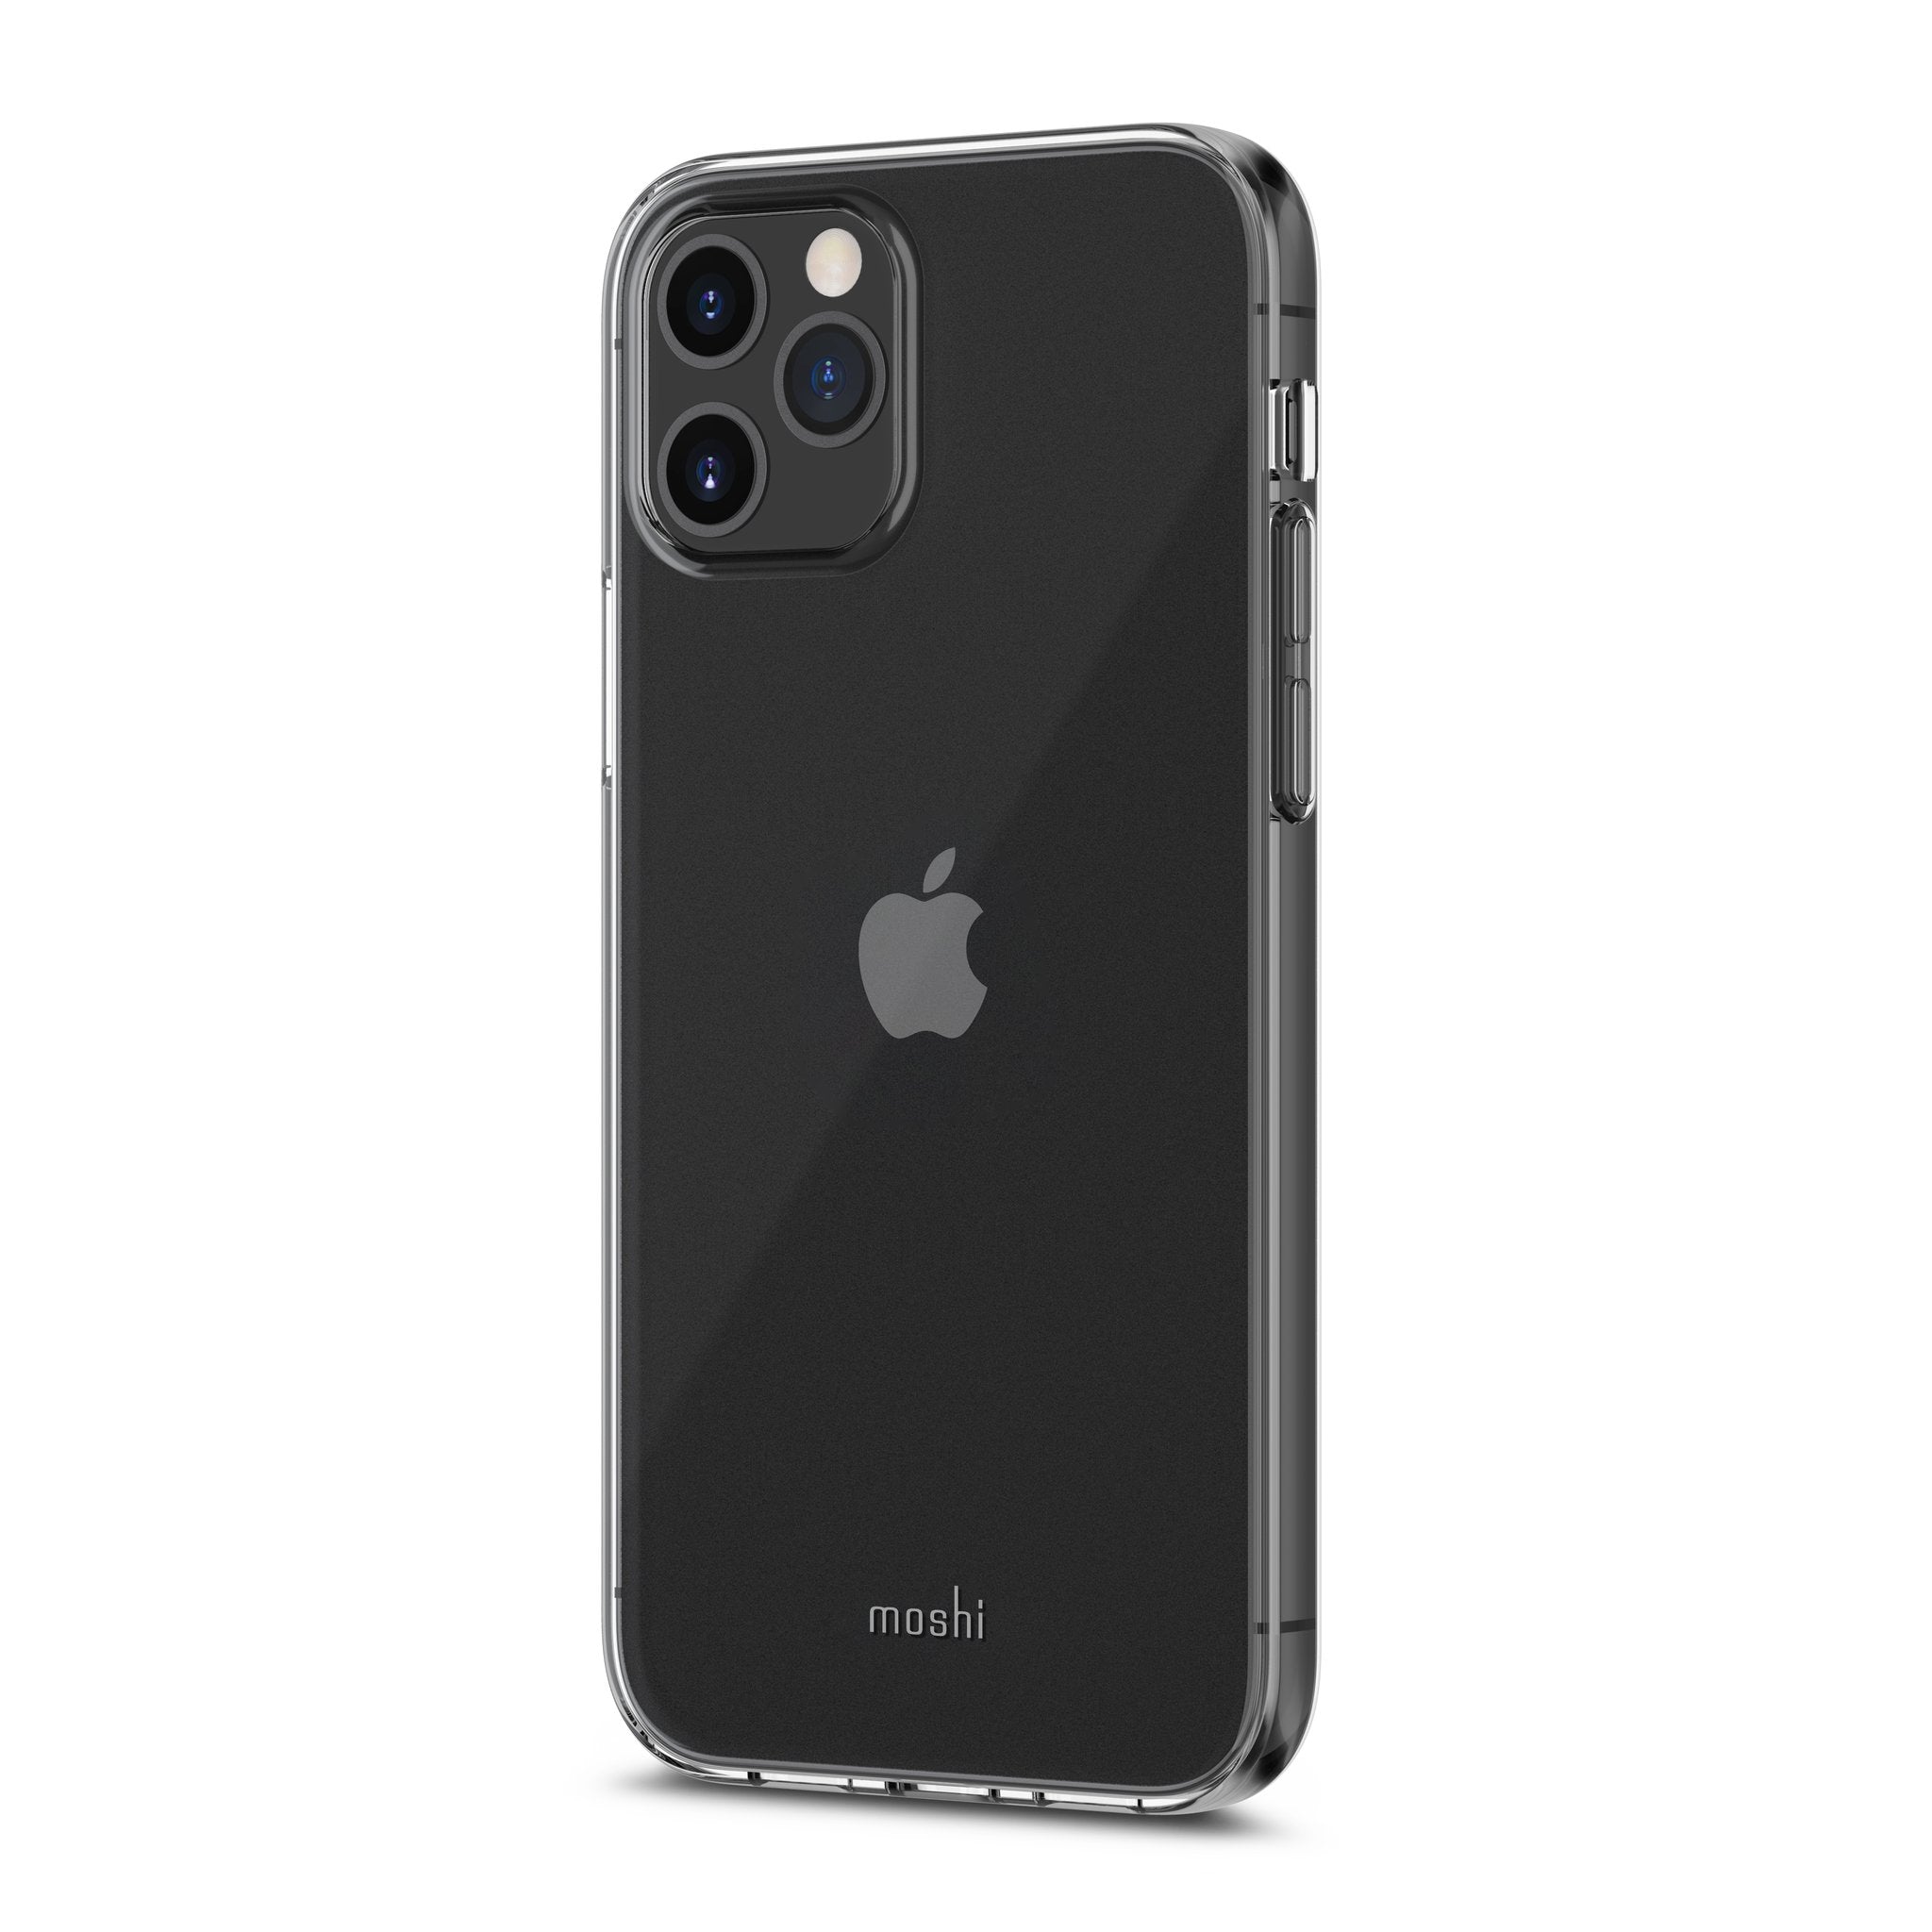 Moshi Vitros Case for iPhone 12 / 12 Pro - Crystal Clear